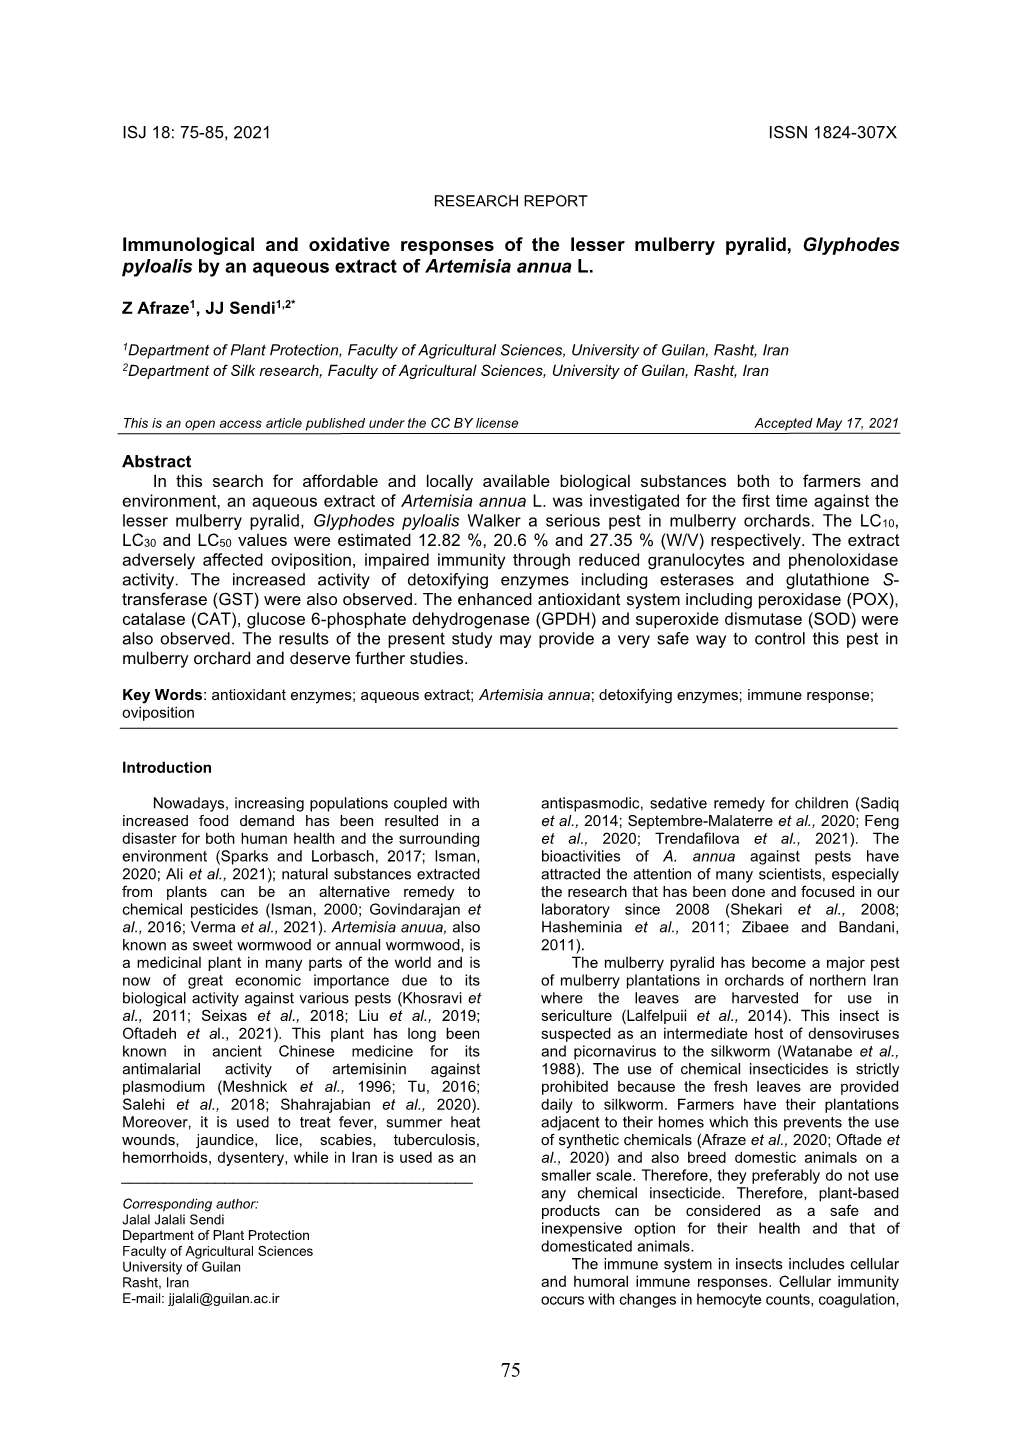 Immunological and Oxidative Responses of the Lesser Mulberry Pyralid, Glyphodes Pyloalis by an Aqueous Extract of Artemisia Annua L